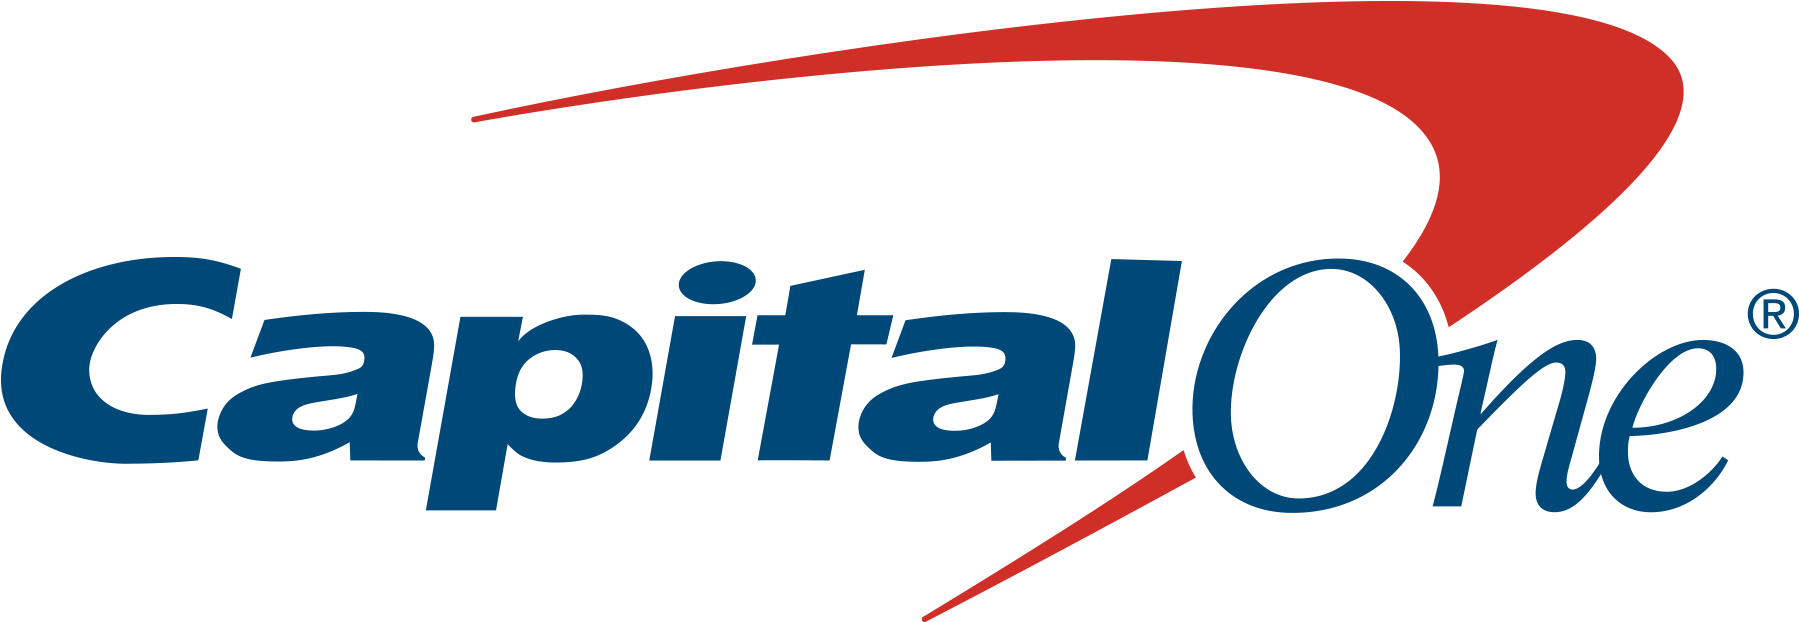 Capital One Open House - Capital One Logo Png (1836x657)